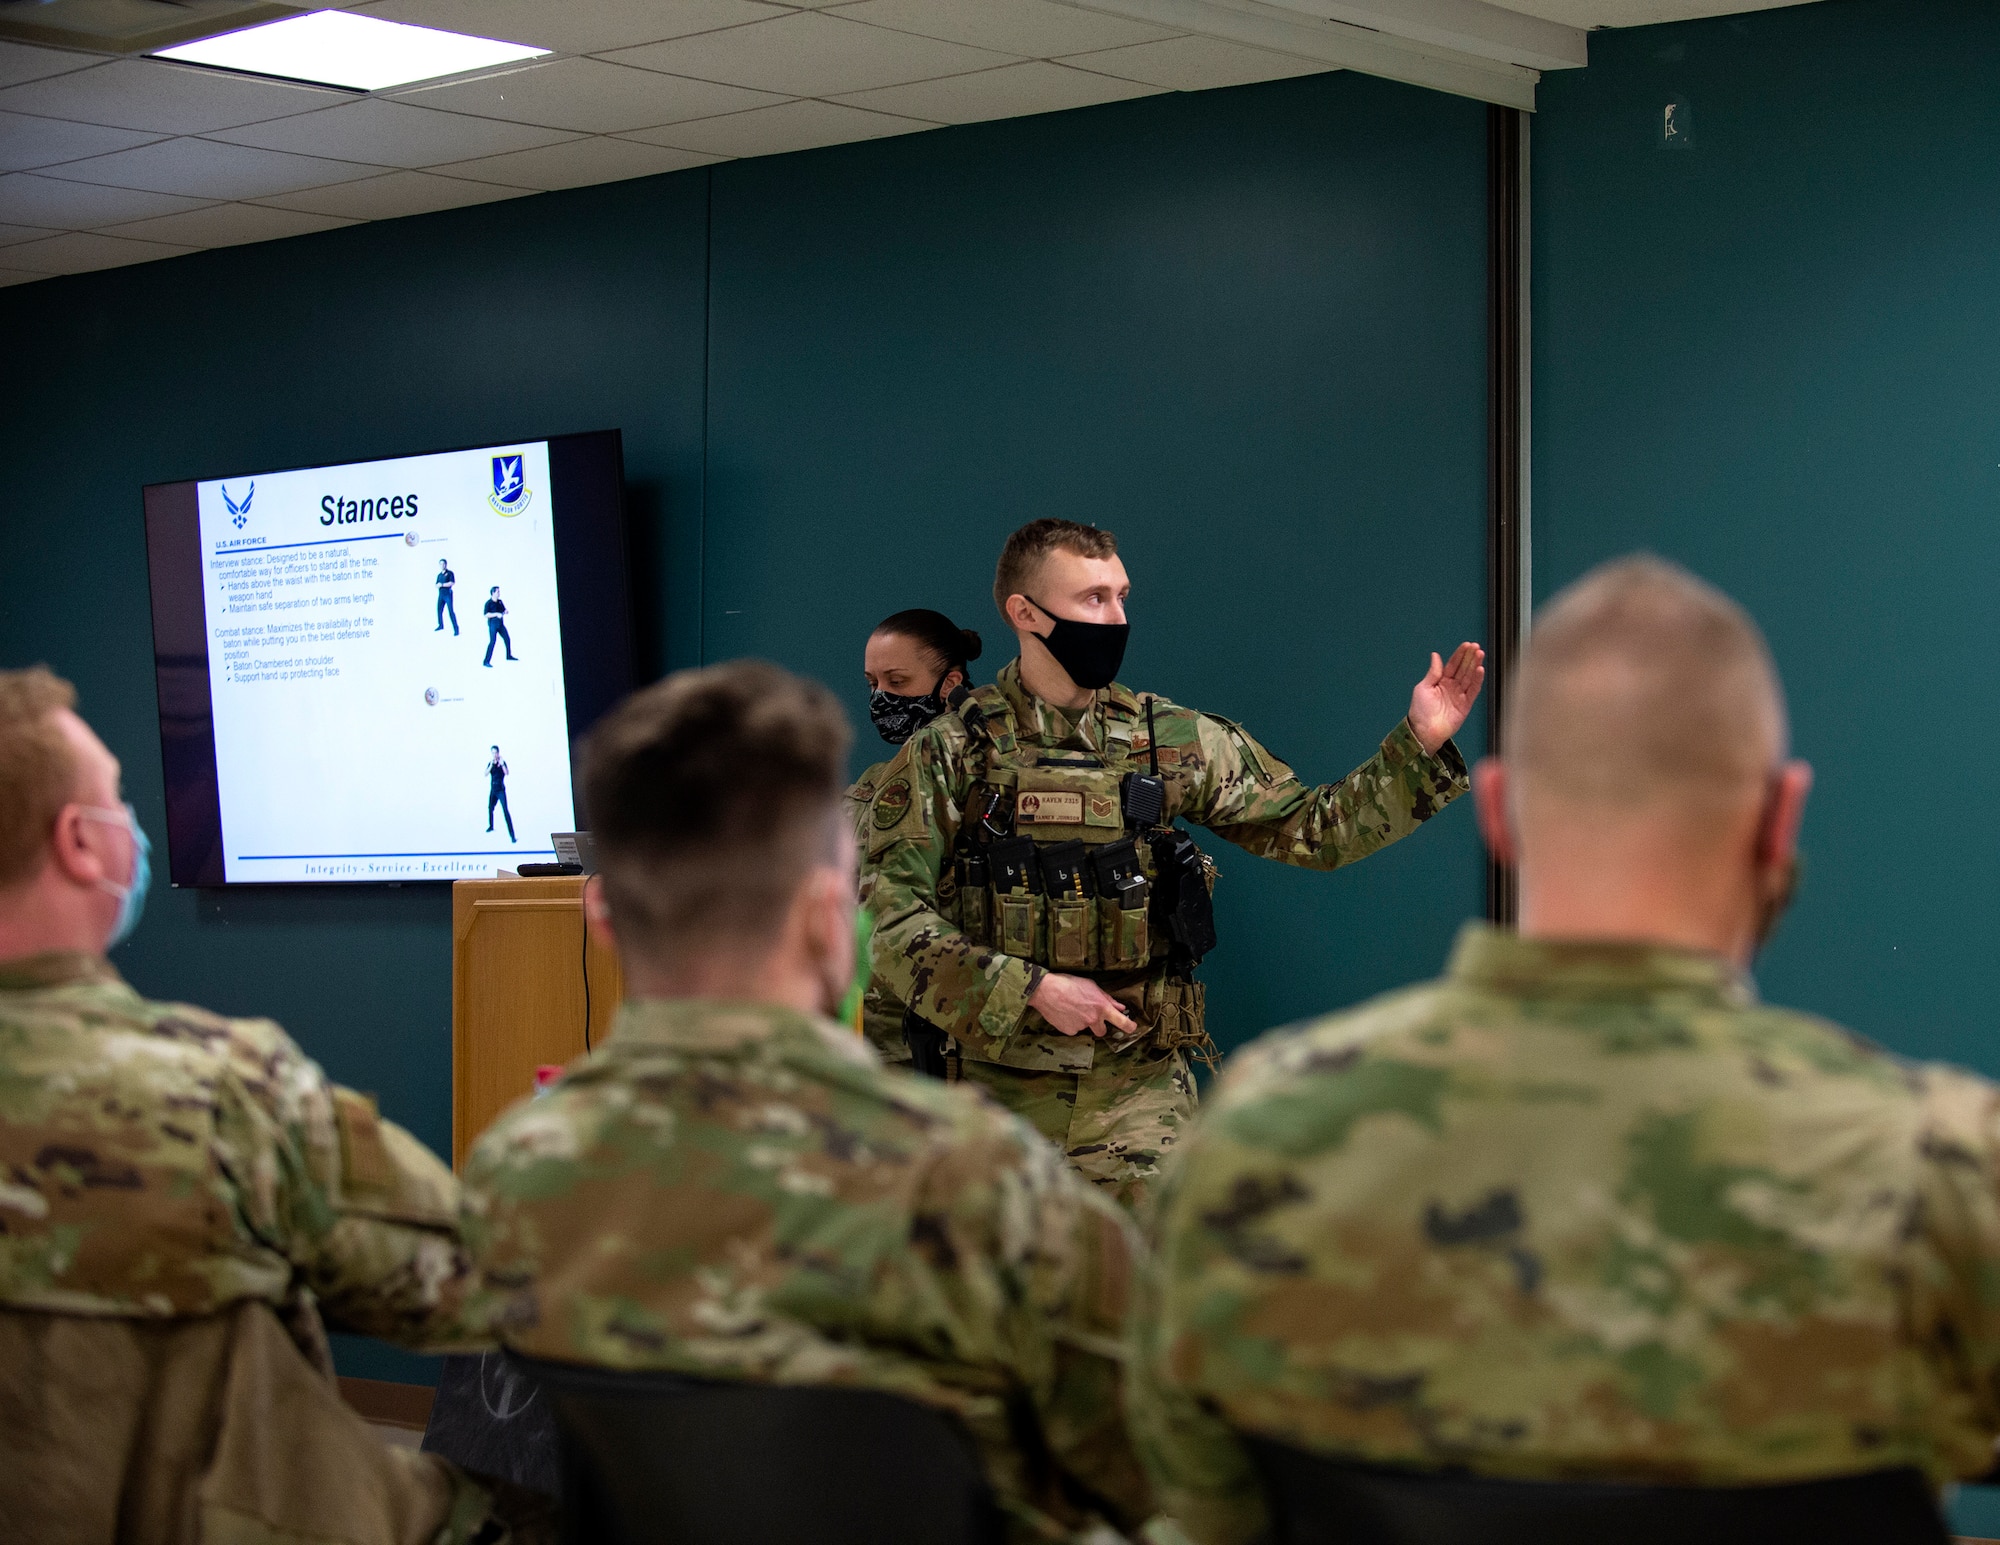 U.S. Air Force Tech. Sgt. Tanner Johnson, 133rd Security Forces Squadron, teaches a class on how to use a collapsible baton in St. Paul, Minn., Feb. 24, 2021. Members from the 133rd Airlift Wing are taking part in the annual security augmentee training program, which equips base personnel with the fundamentals skills required to assist Security Forces if called upon.